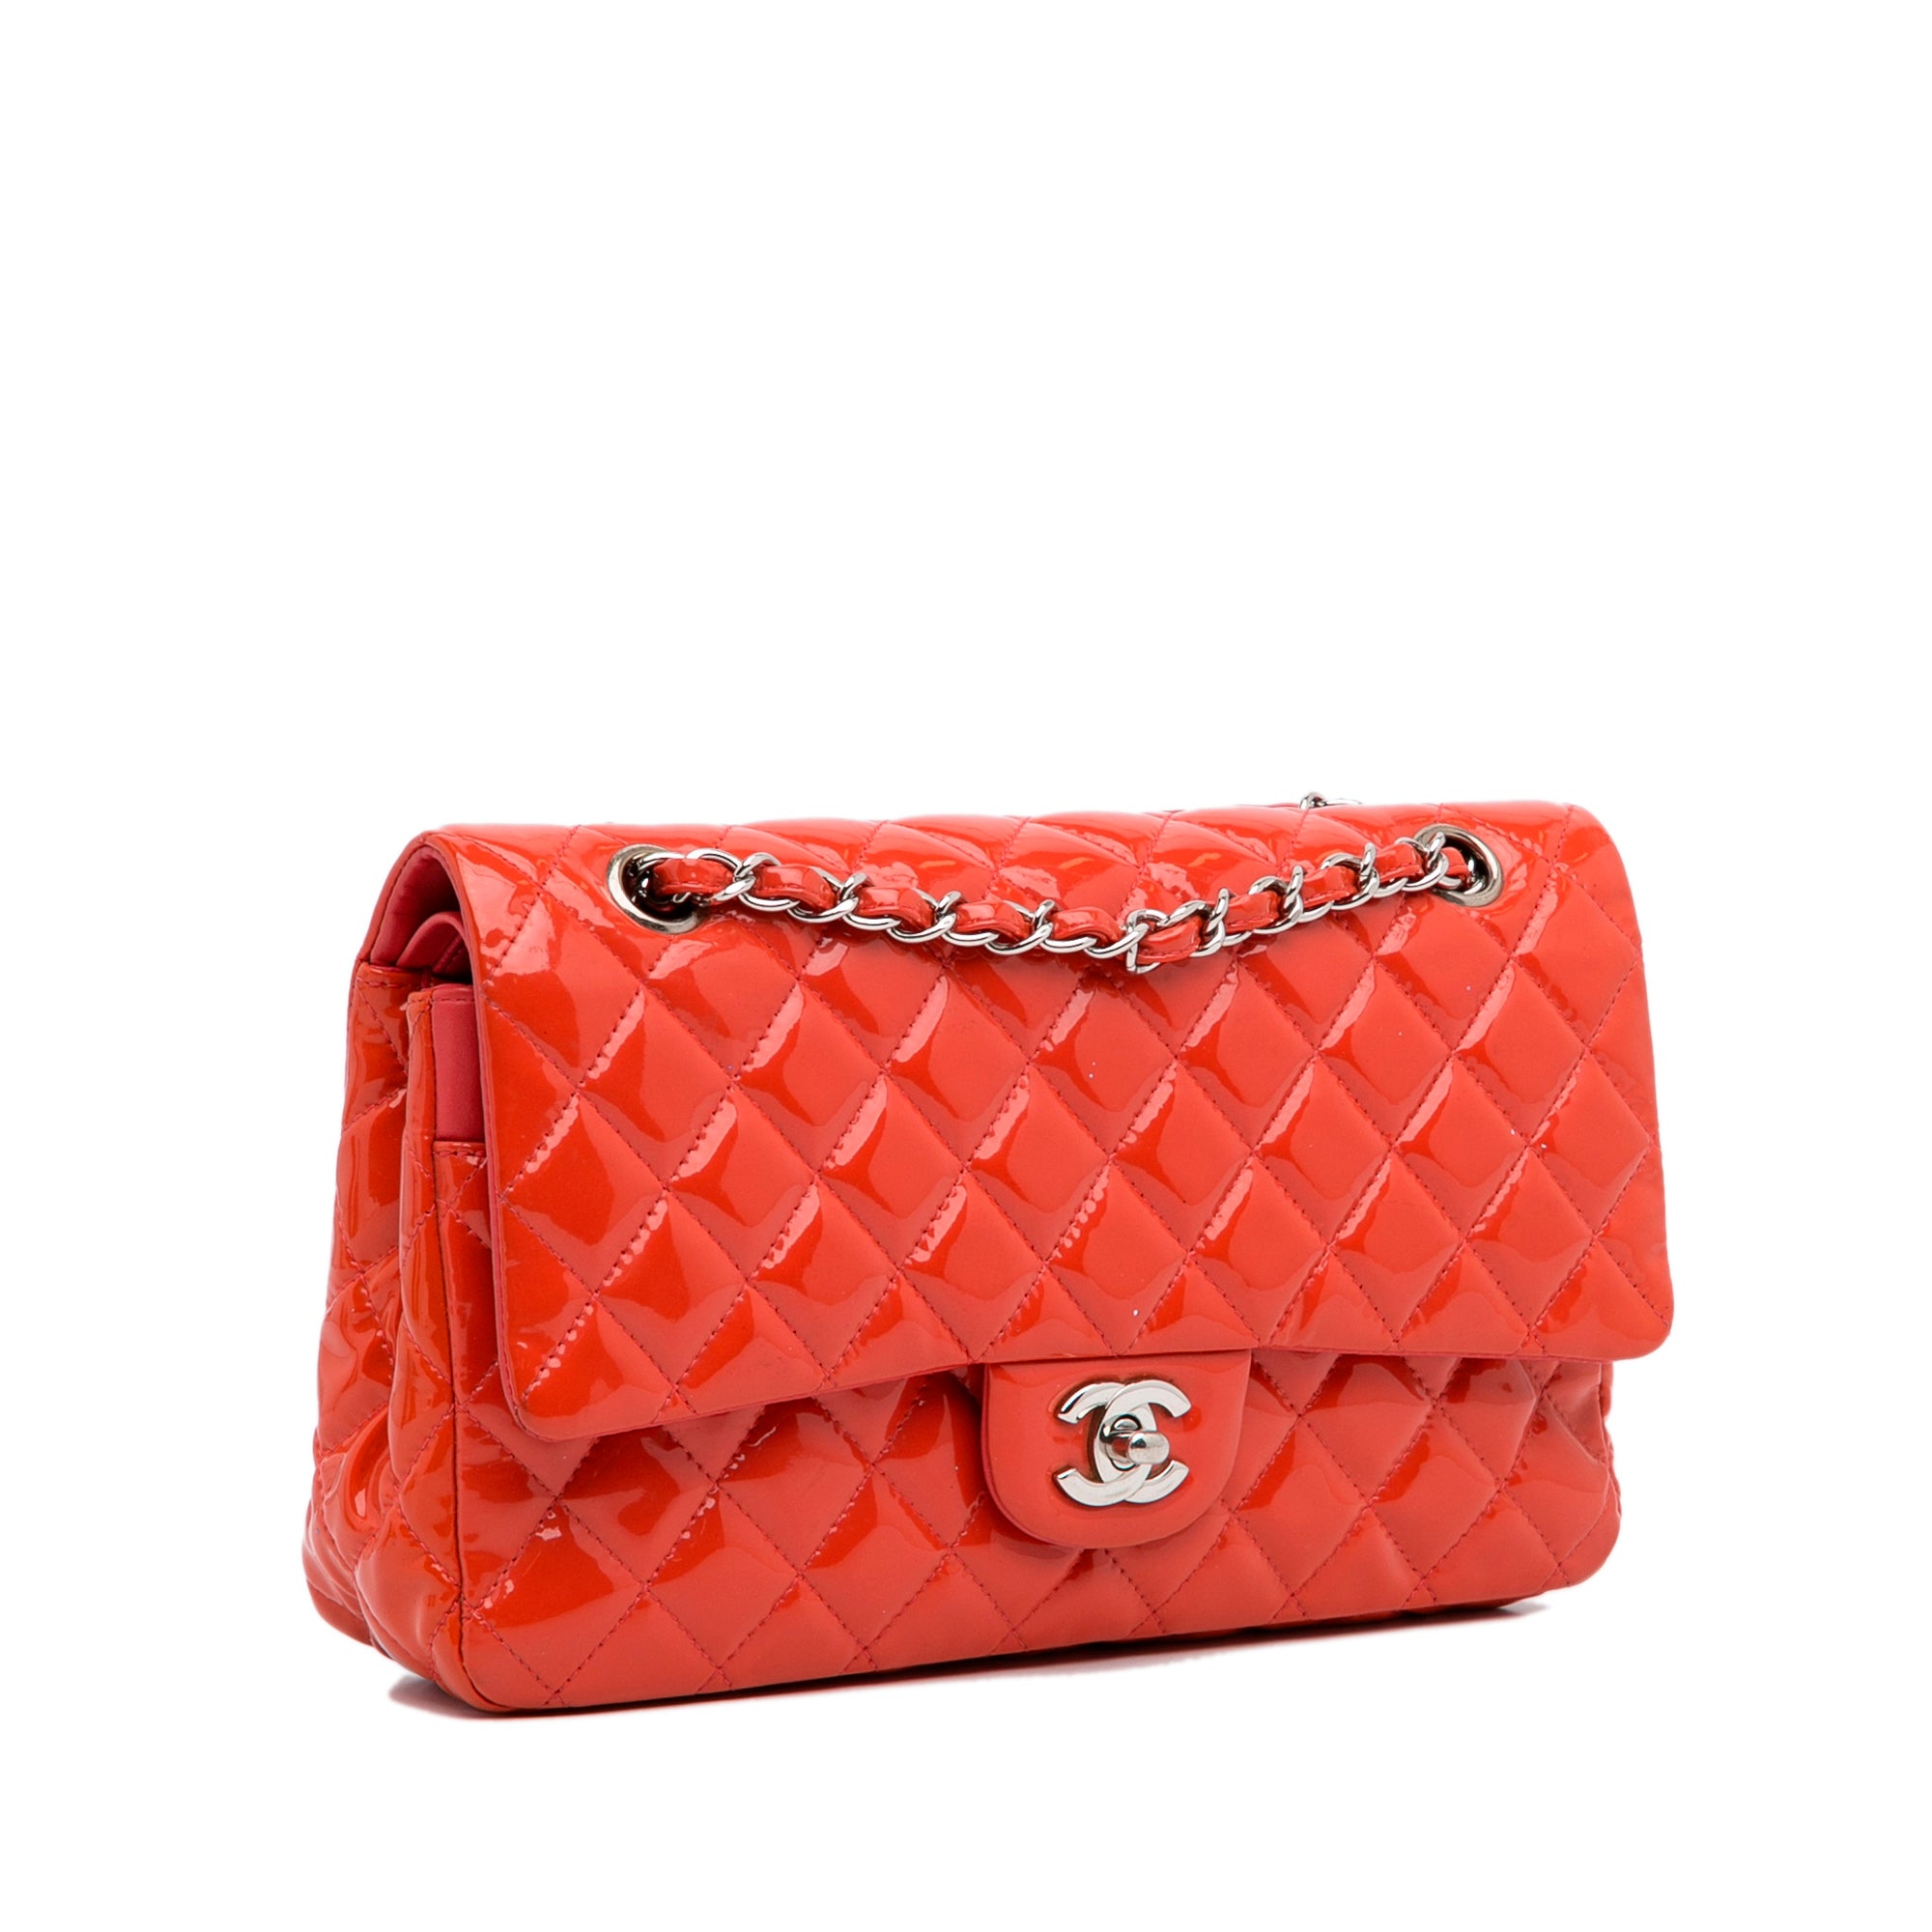 chanel mademoiselle patent bag